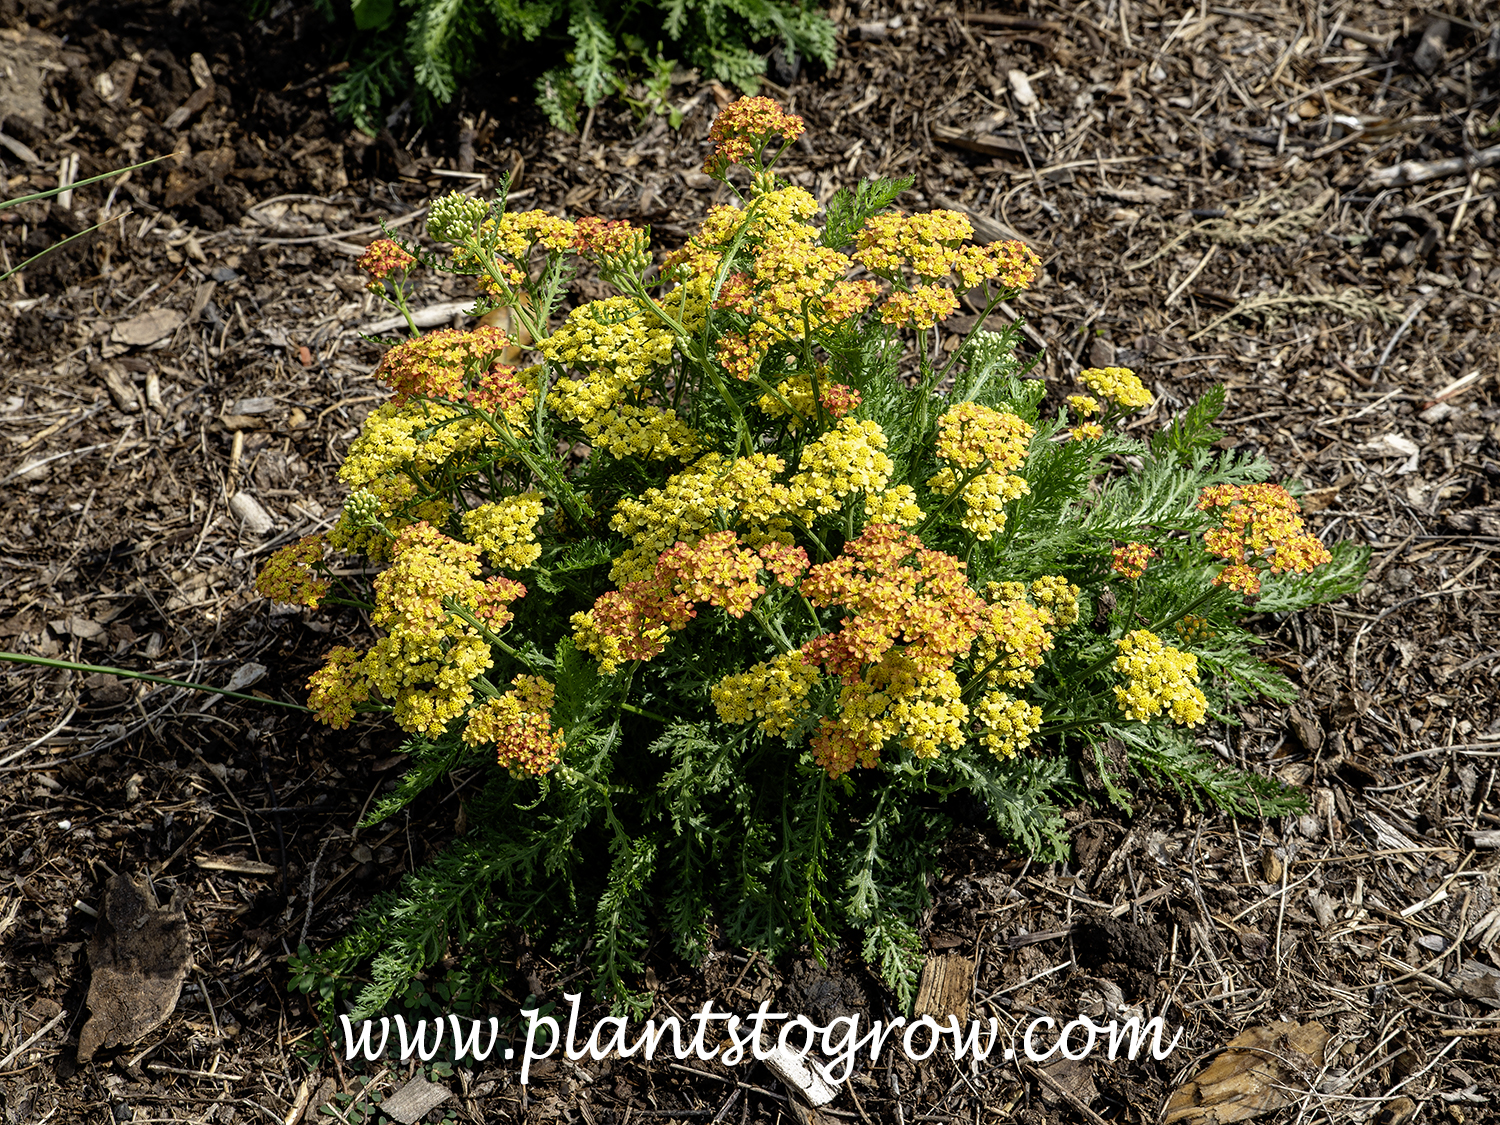 Yellow Terracotta' Yarrow (Achillea millefolium)
This Yarrow forms nice compact mounds of foliage with shorter flower stalks.